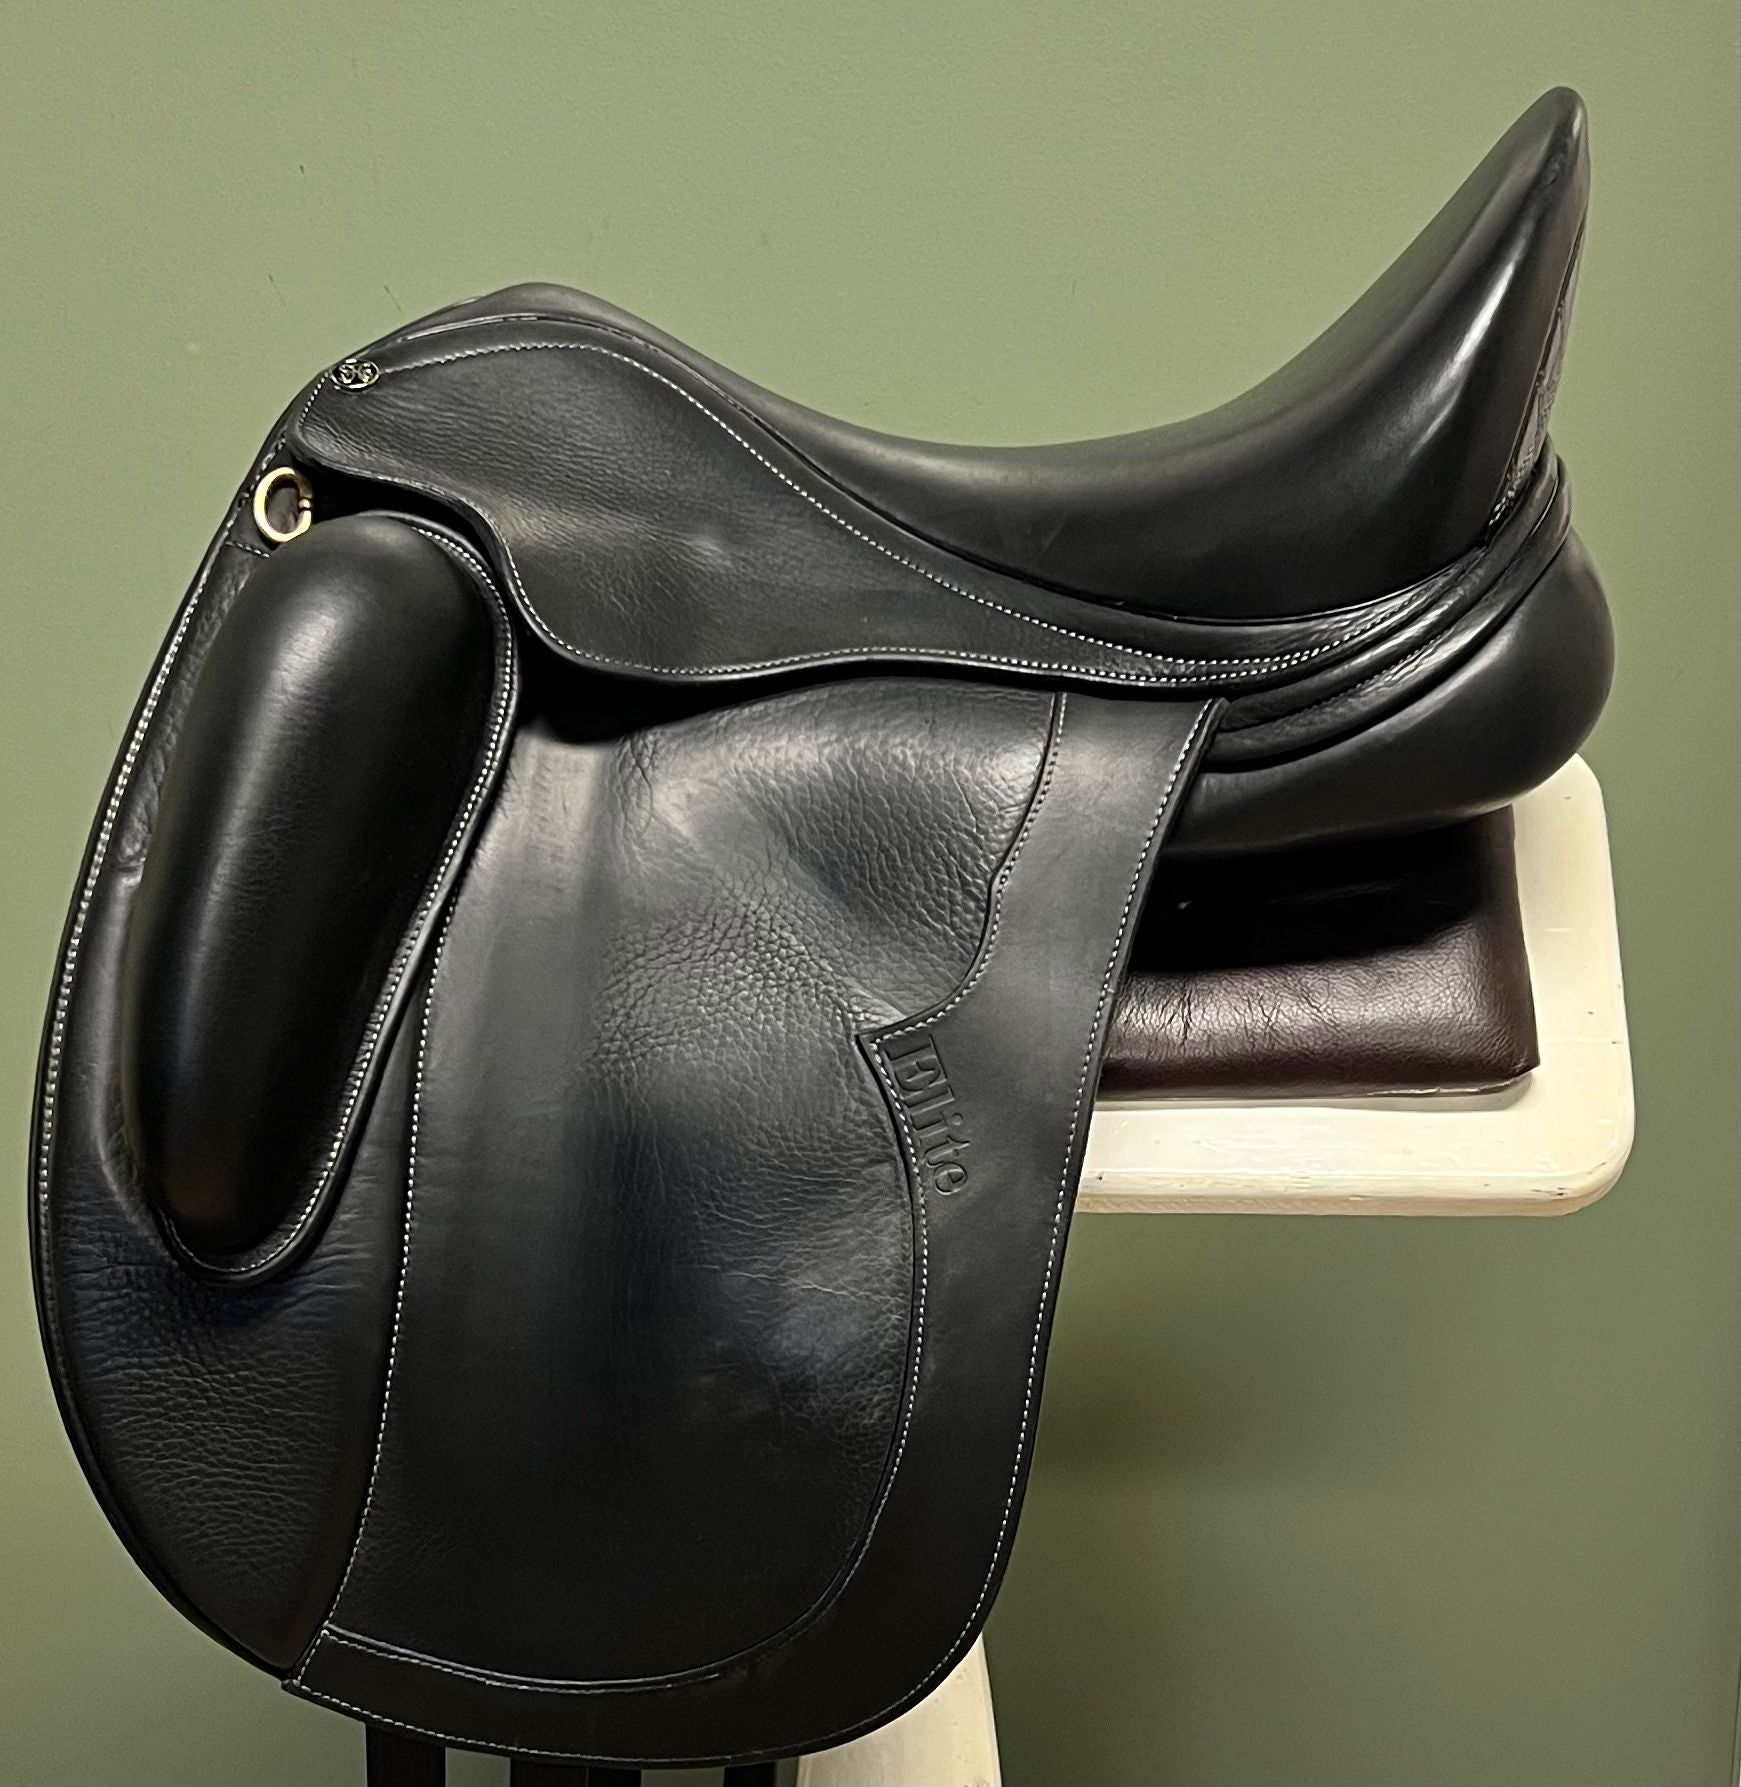 Pre-Loved StrideFree Elite Saddle -  Black with grey stitching and grey cross stitching in half moon. 17.5"